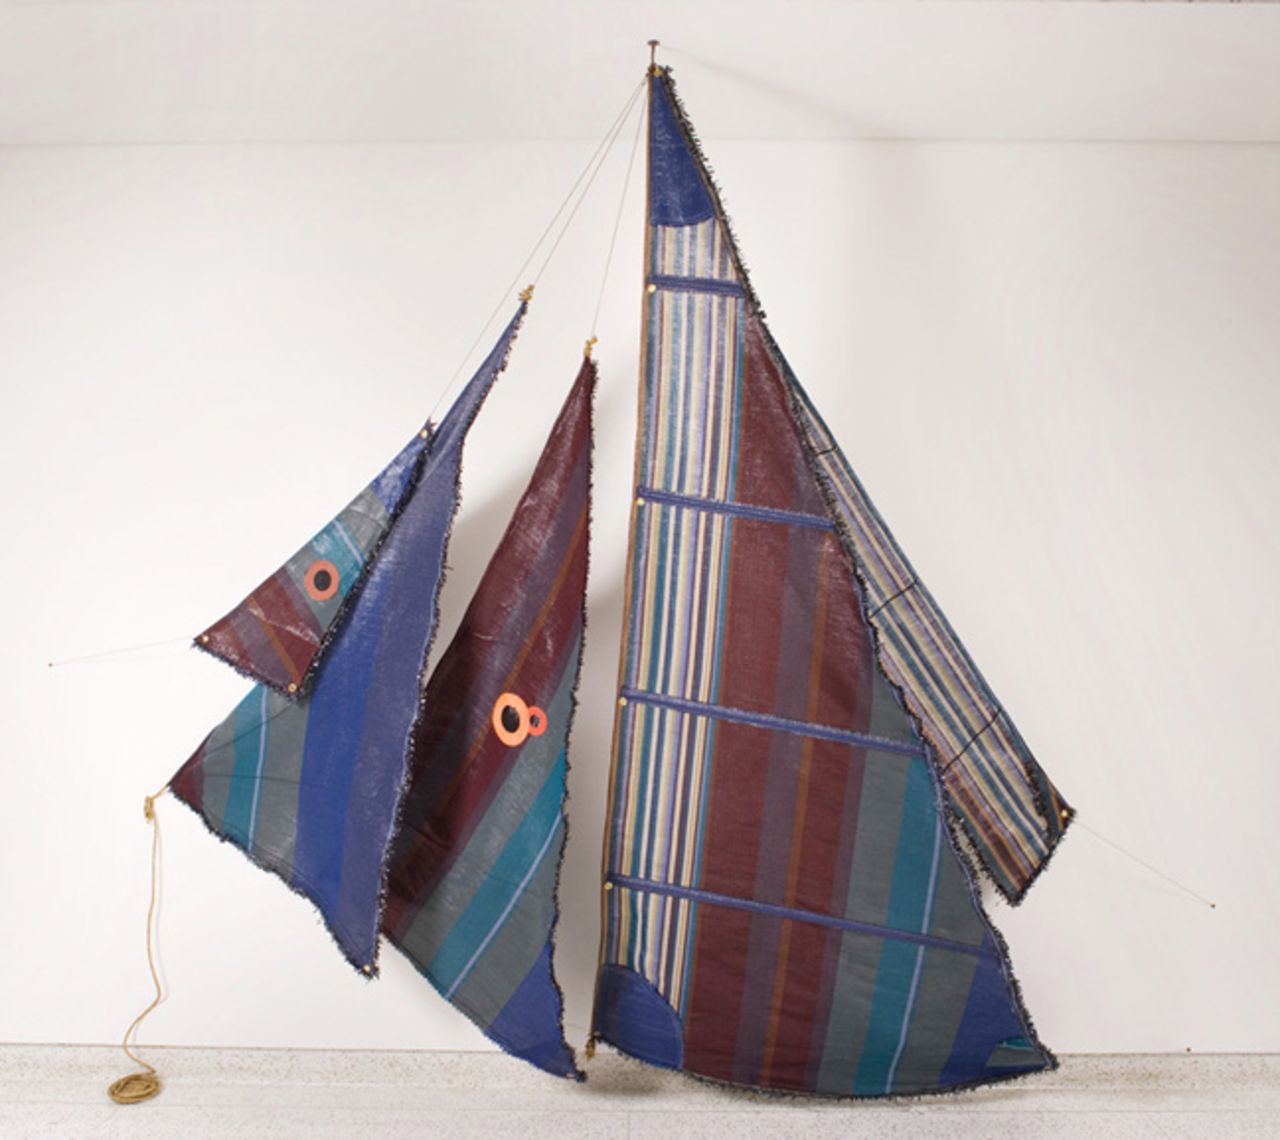 In 2007, Santoro made a set of five sailboat sails inspired by Tibetan prayer flags and "tell-tales" (or wind indicators) which are often used on sailboats. Each color in the pattern represented a note in a musical score.